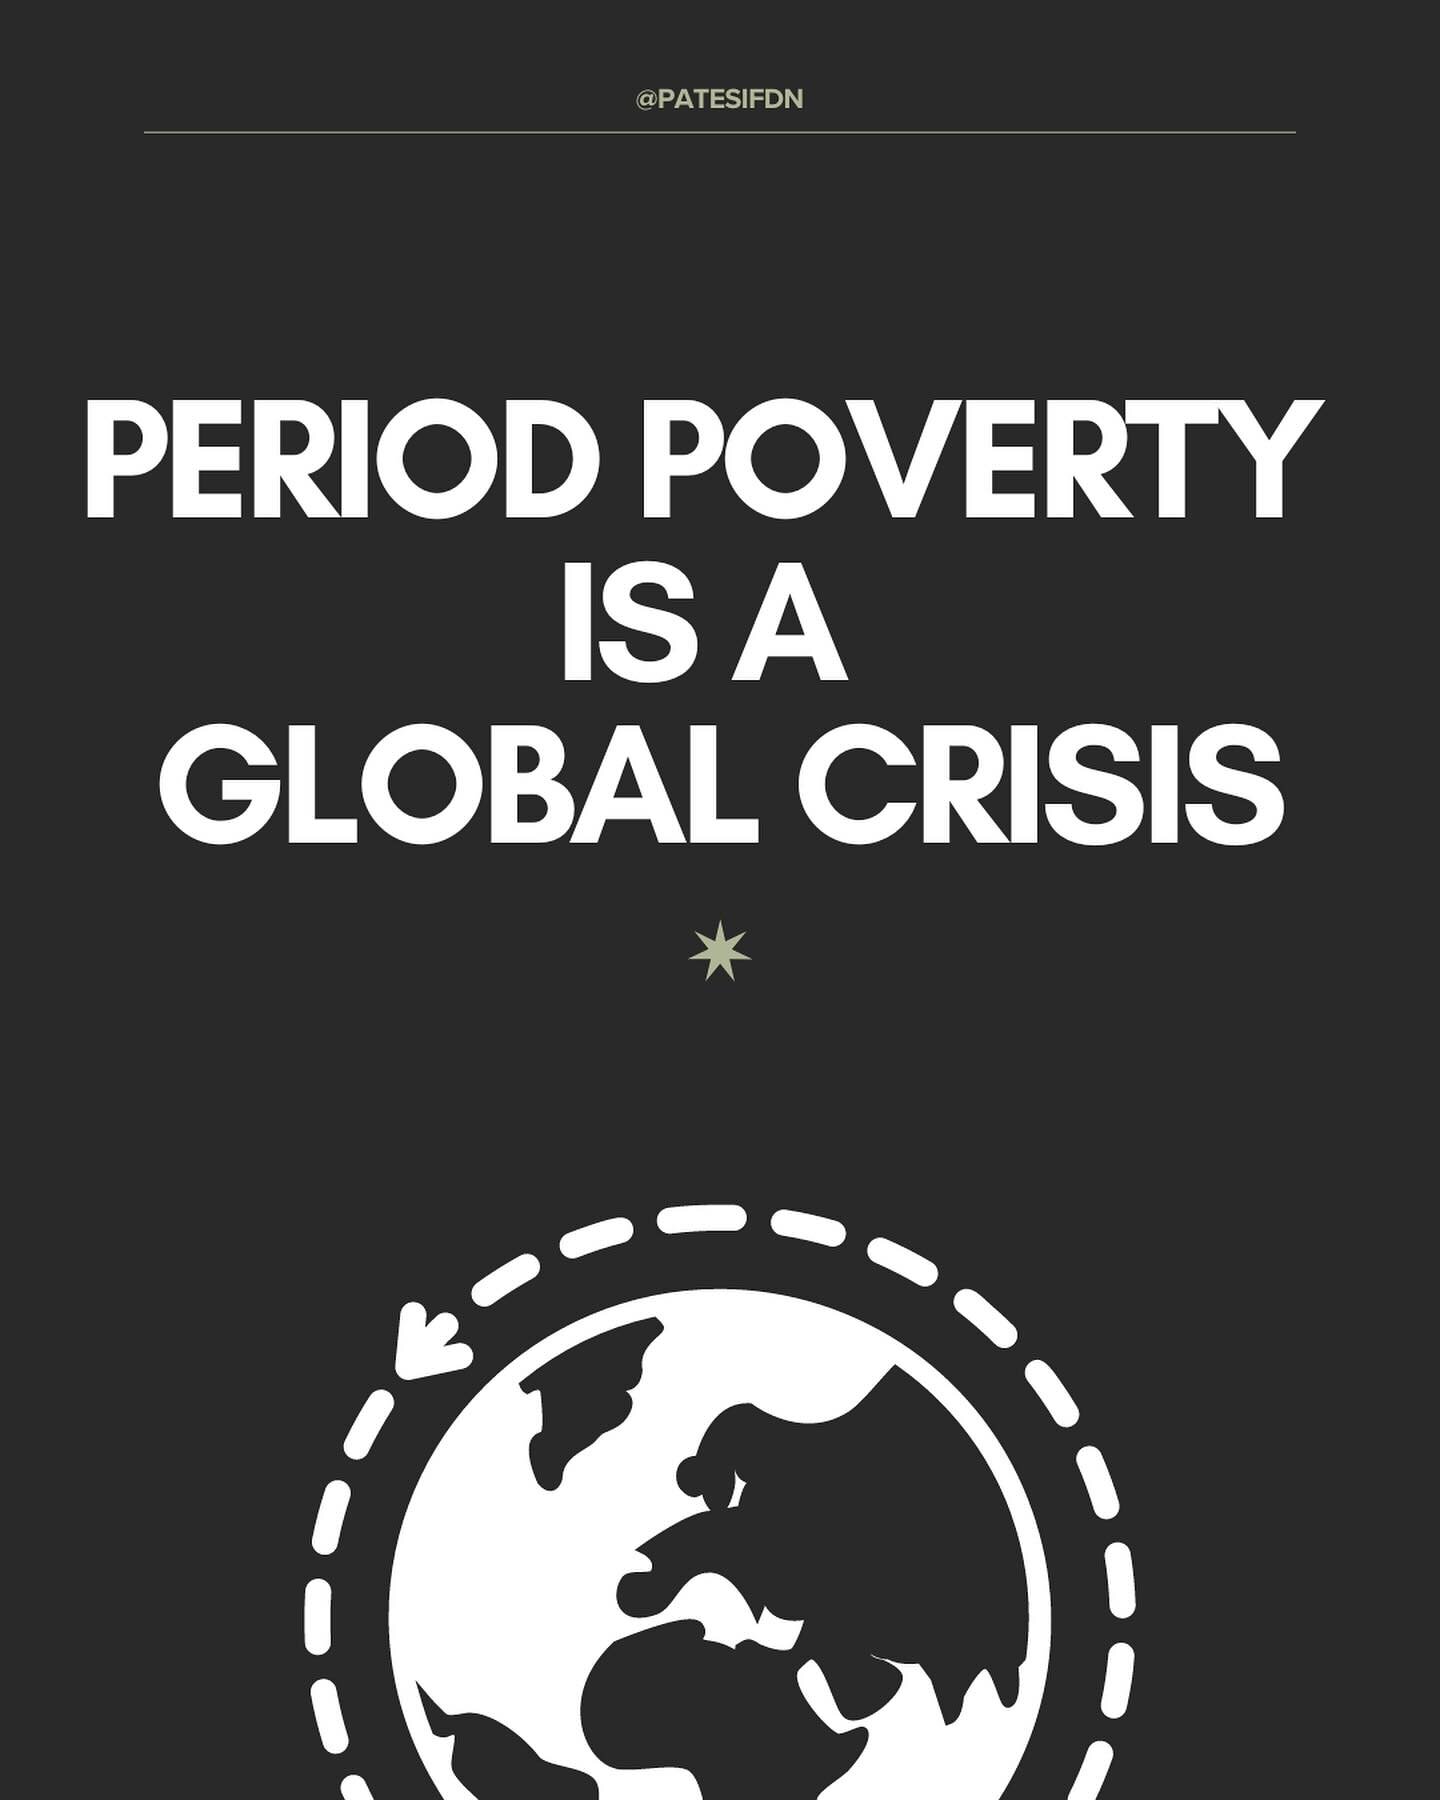 Beyond borders and boundaries, period poverty persists as a global crisis. It&rsquo;s not just about menstruating; it&rsquo;s about the injustice, the disparities, and the urgent need for change. We want to recognize this article from @wiis_global, s